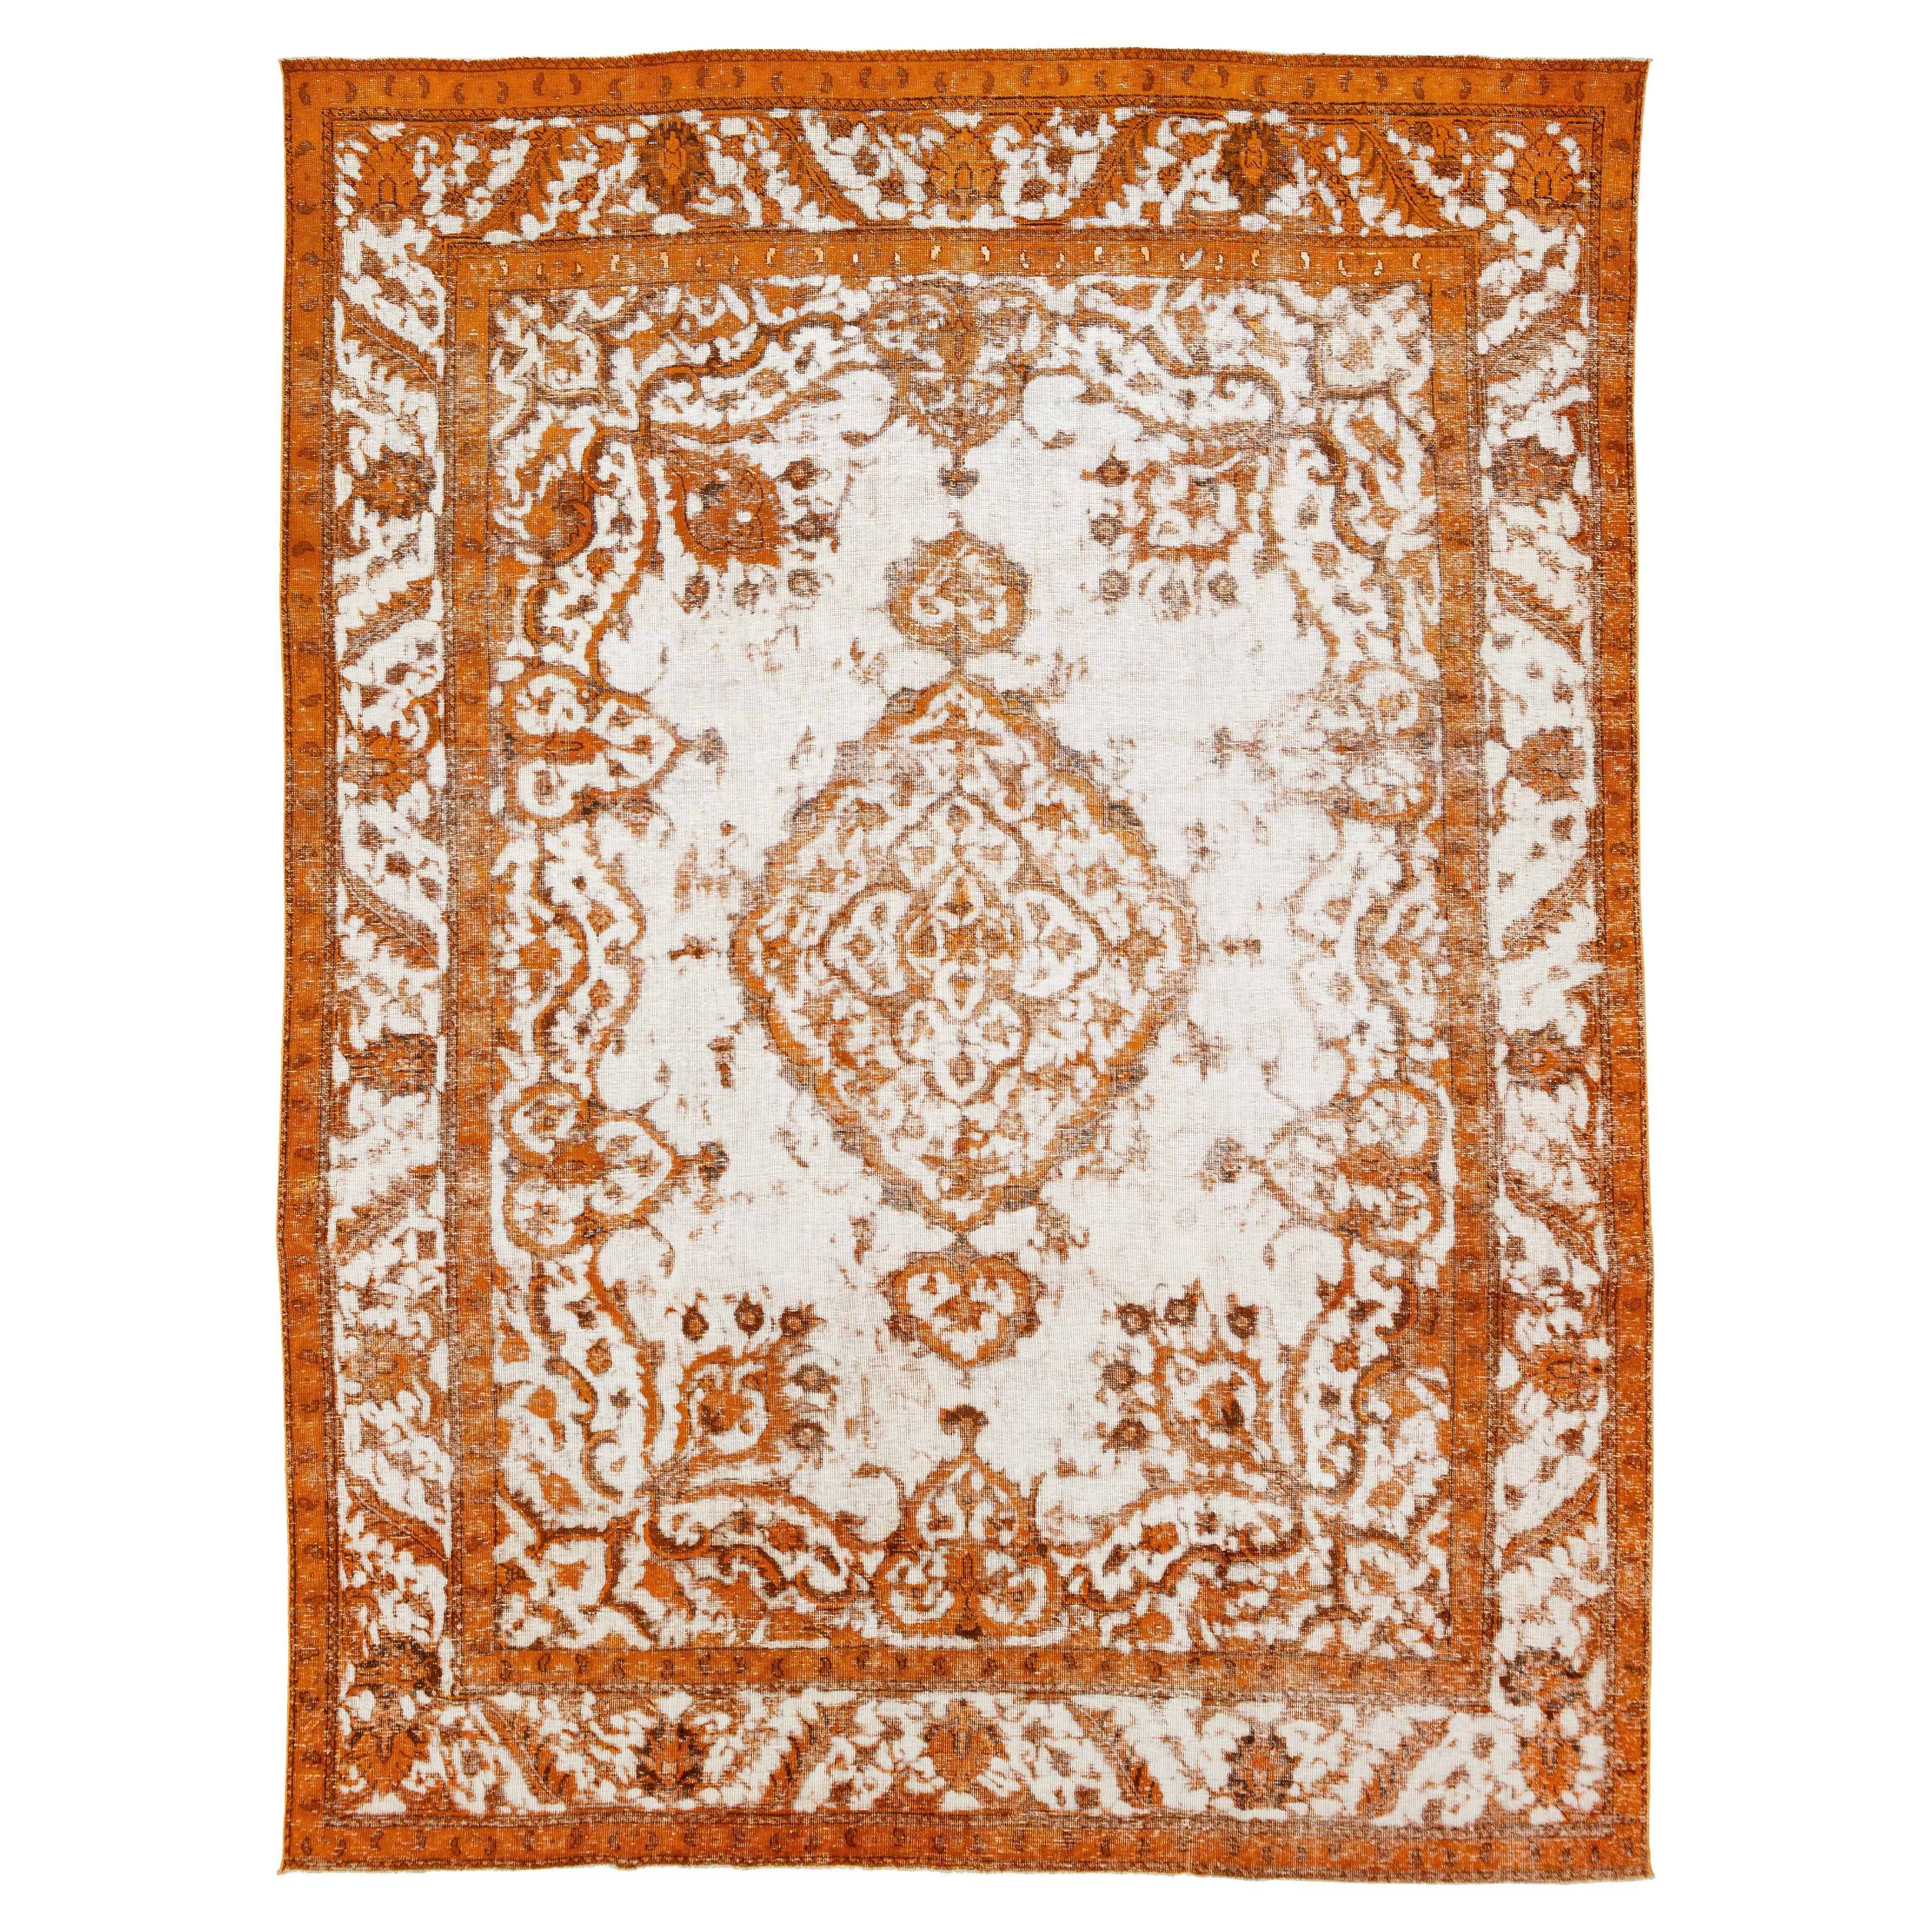  Overdyed Antique Orange Wool Rug With Medallion Motif For Sale